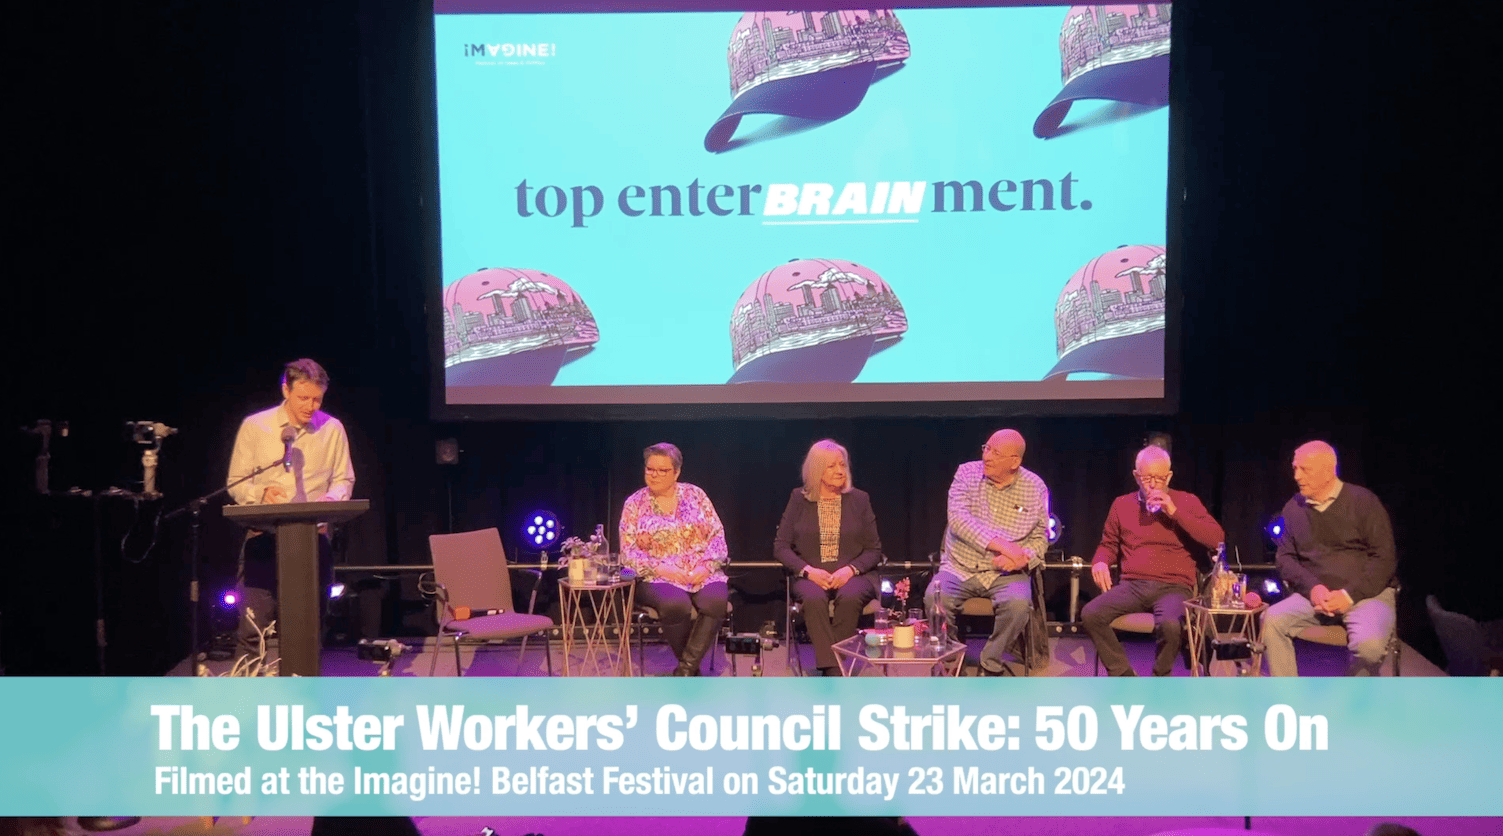 Freeze frame from video of Ulster Workers’ Council Strike: 50 Years On event in Crescent Arts Centre - Connal Parr is standing at the podium - seated near him are Dawn Purvis, Carmel Gates, Harry Donaghy, Jackie Redpath and Jackie McDonald.